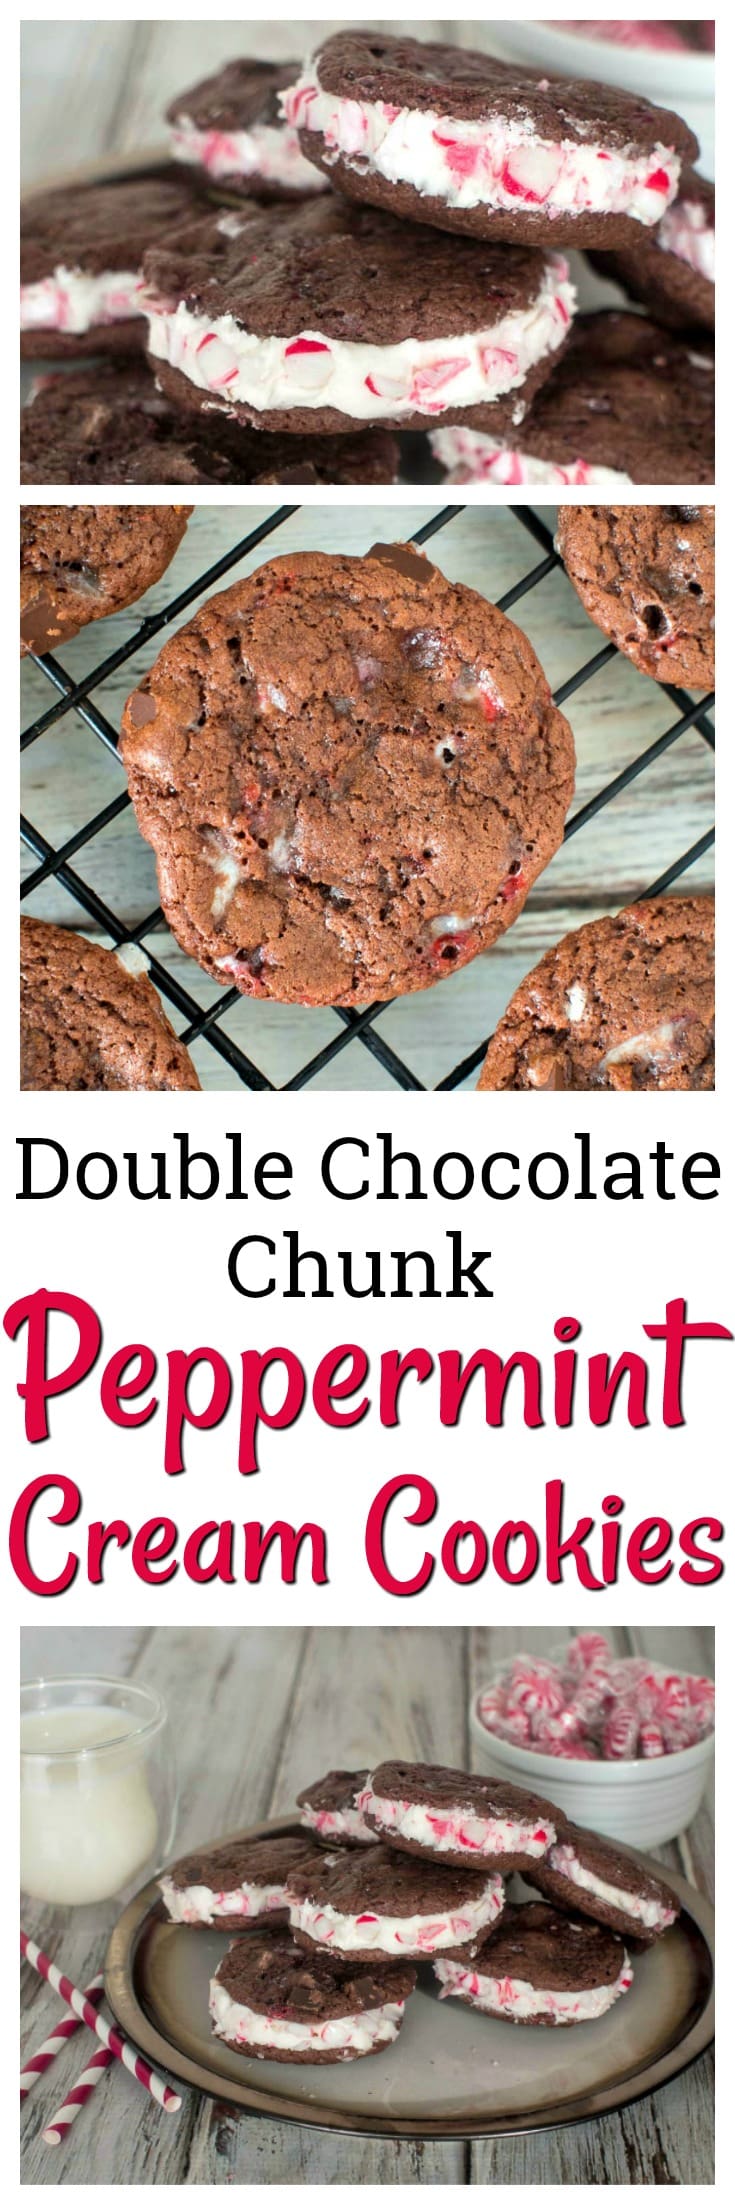 Double Chocolate Chunk Peppermint Cream Cookies | Sandwich Cookies | Peppermint Chocolate Cookies | Christmas Cookies | Holiday Desserts